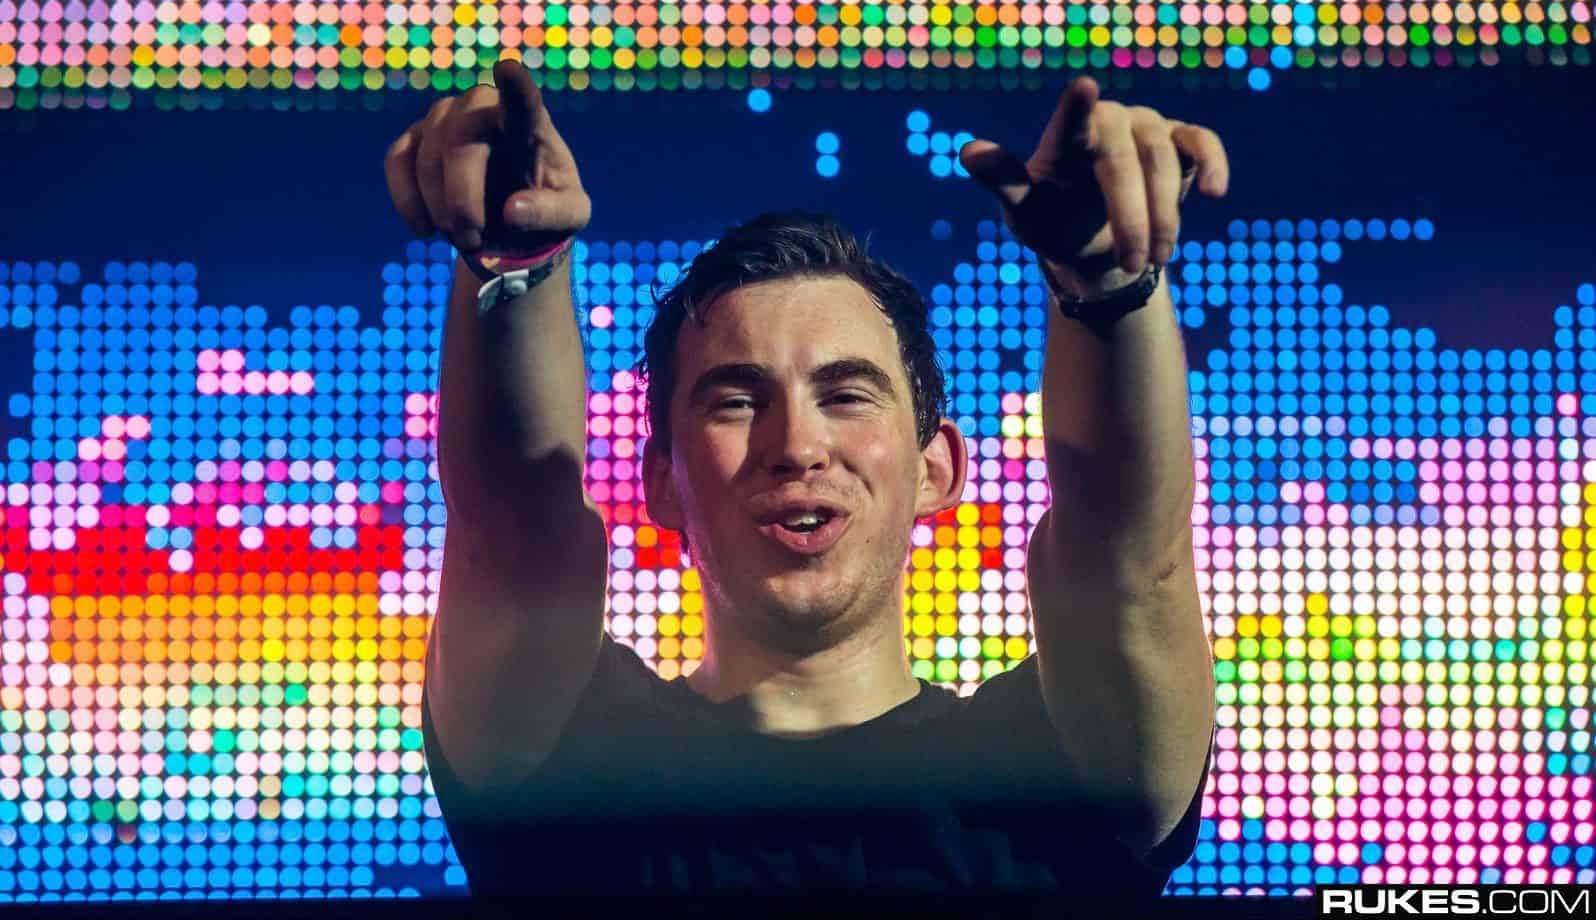 Hardwell On Air completes 9 years with the 450th episode